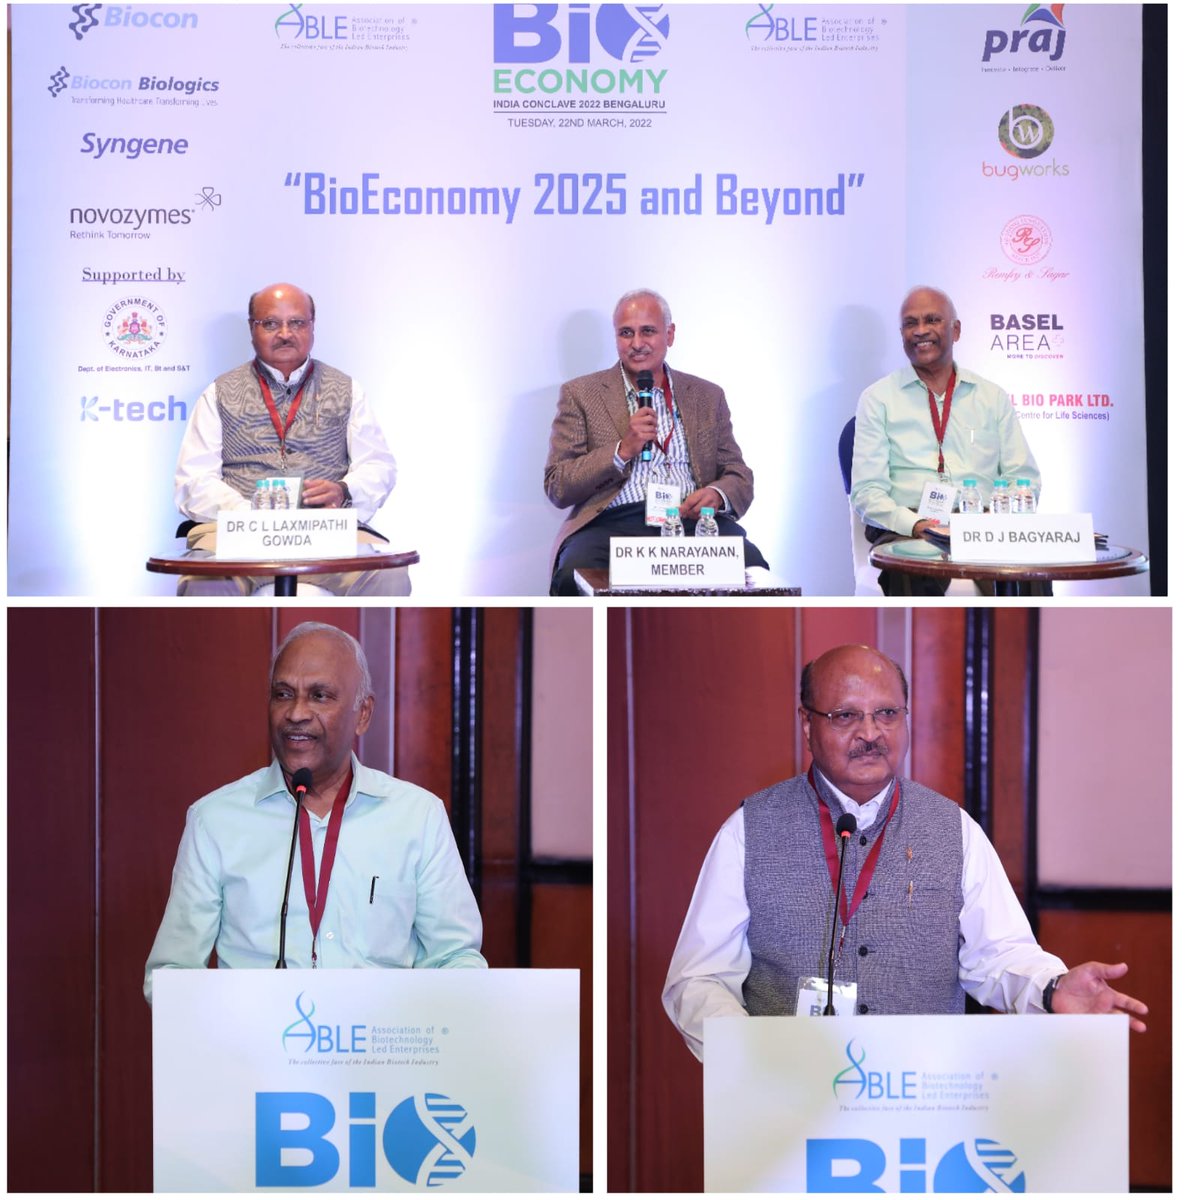 BioEconomy Conclave 2022: BioAgri: “Technological Support to farmers to double their income': Emerging technologies to facilitate farmers improve their yield & address challenges was discussed, moderated by Narayanan @agrigenome @cllgowda GRSV Consulting DJ Bagyaraj @NABI_India